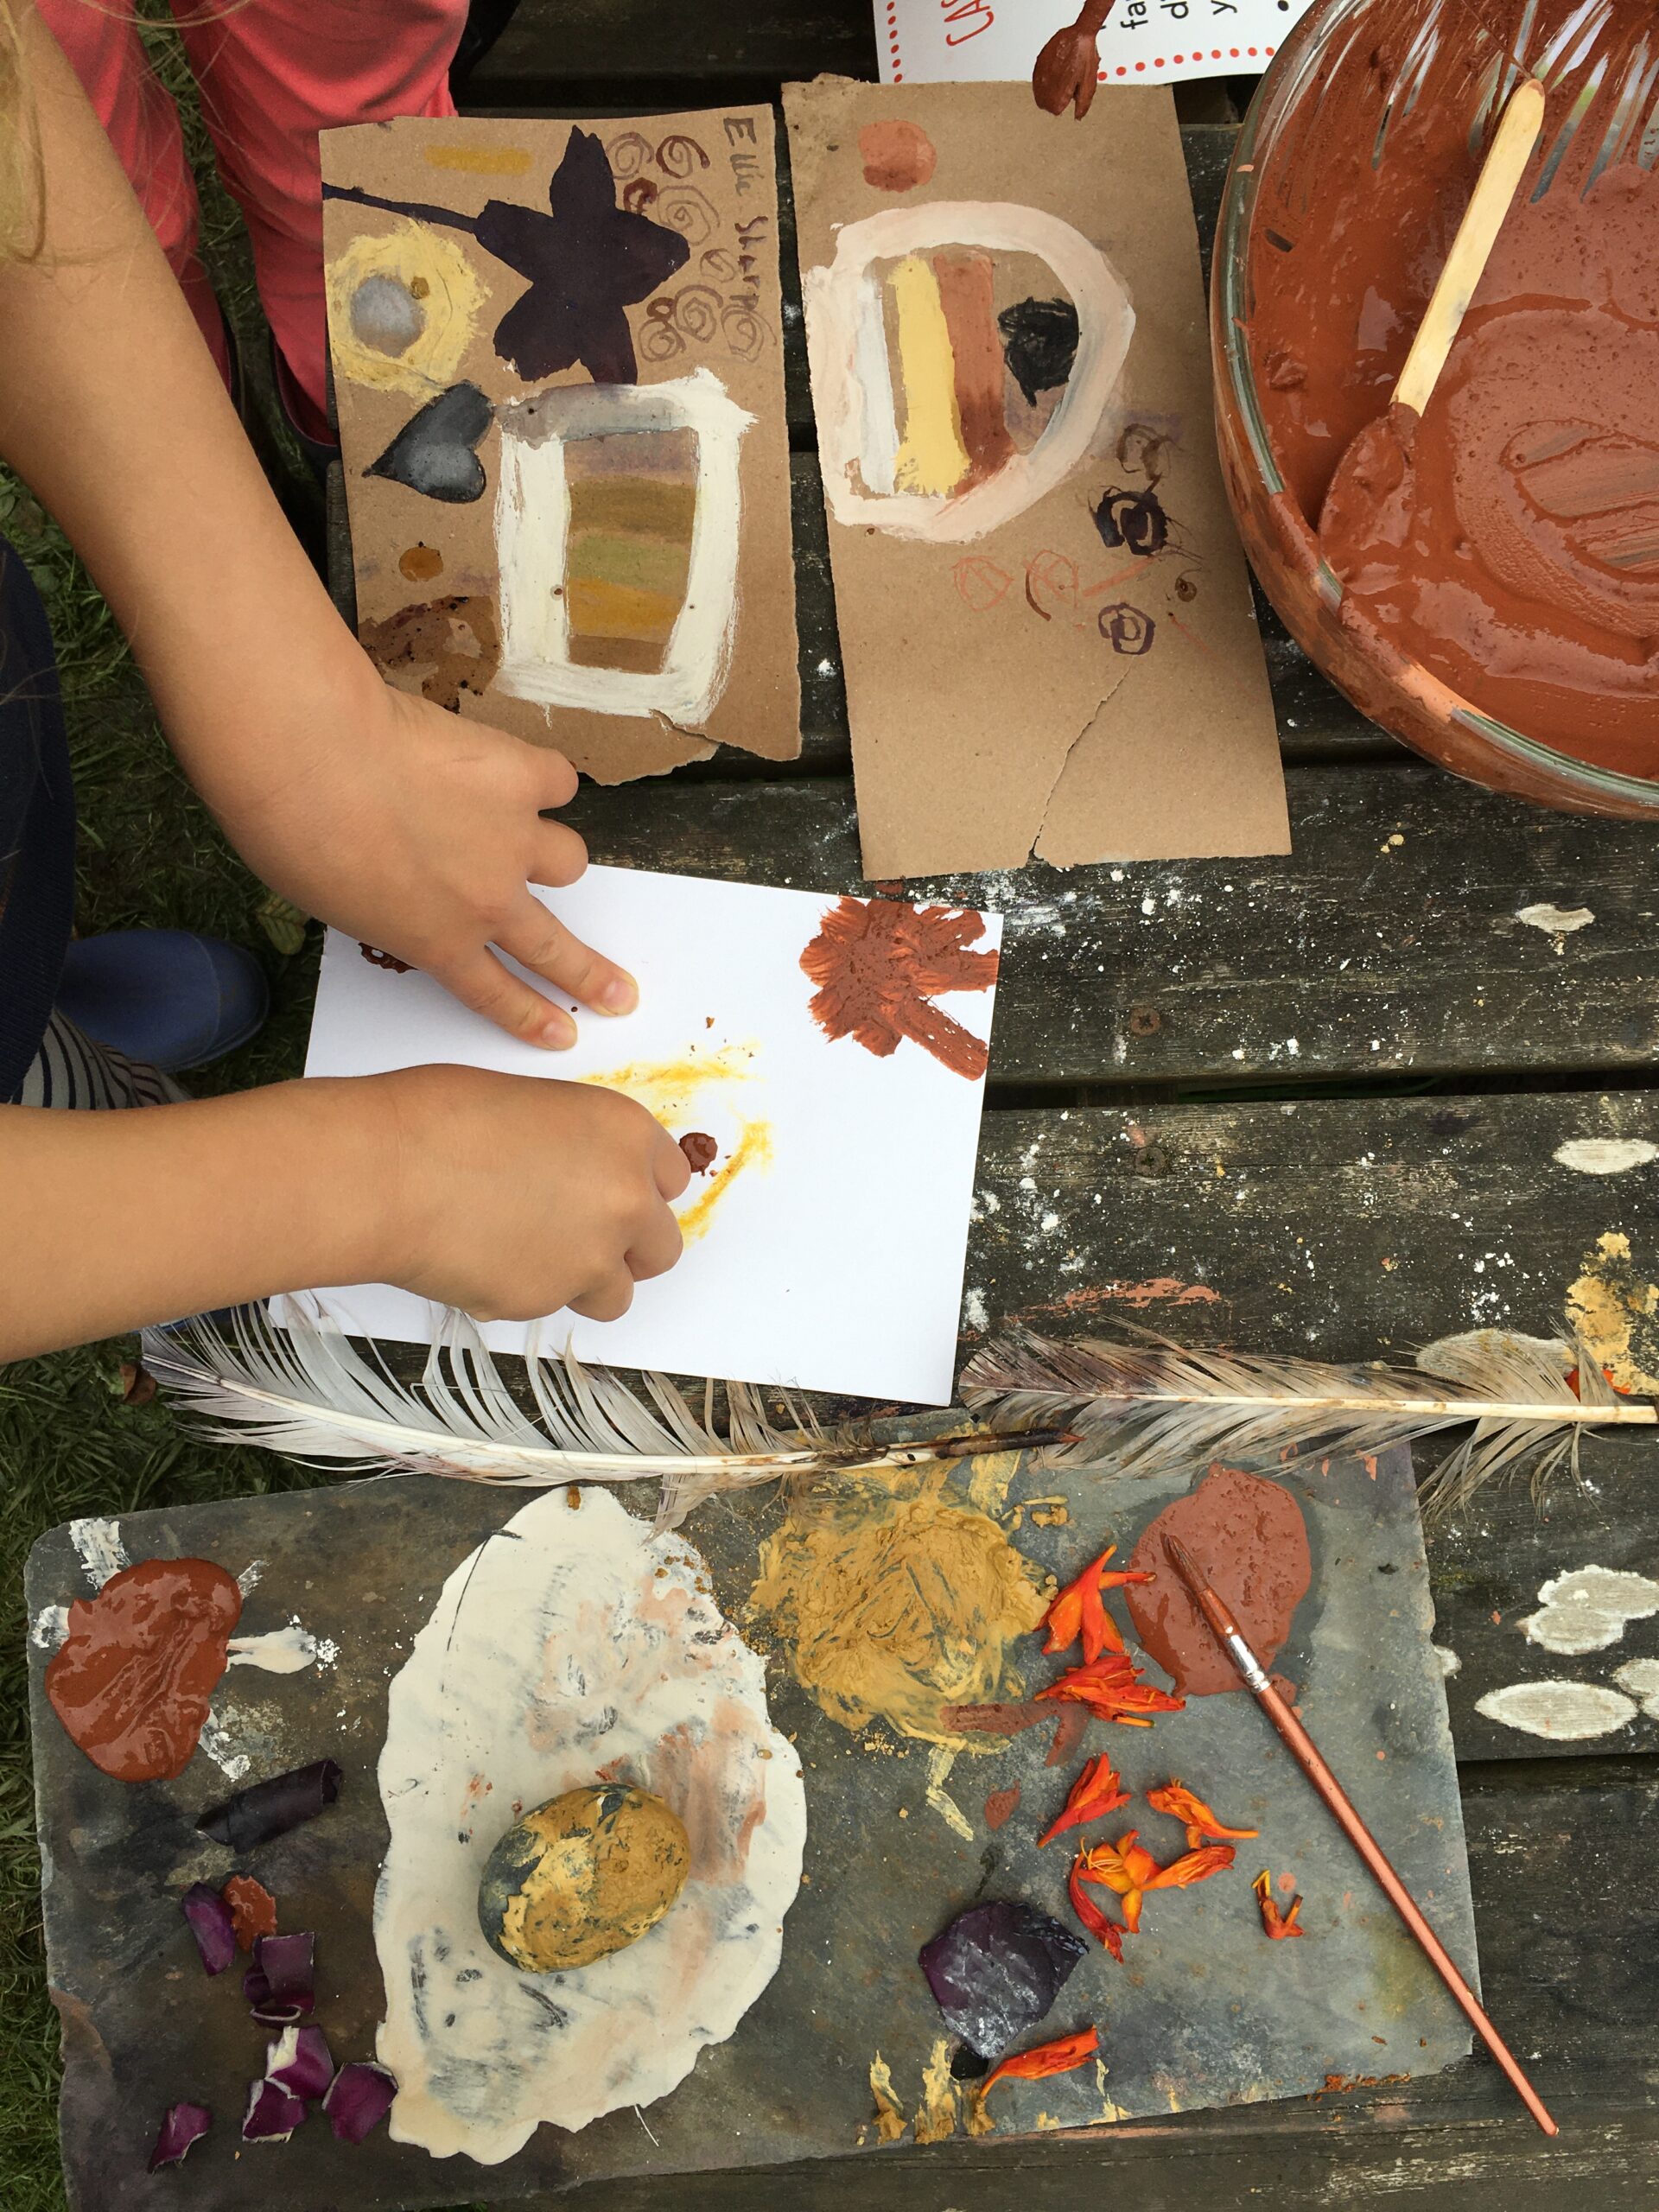 Two hands make a painting from natural materials